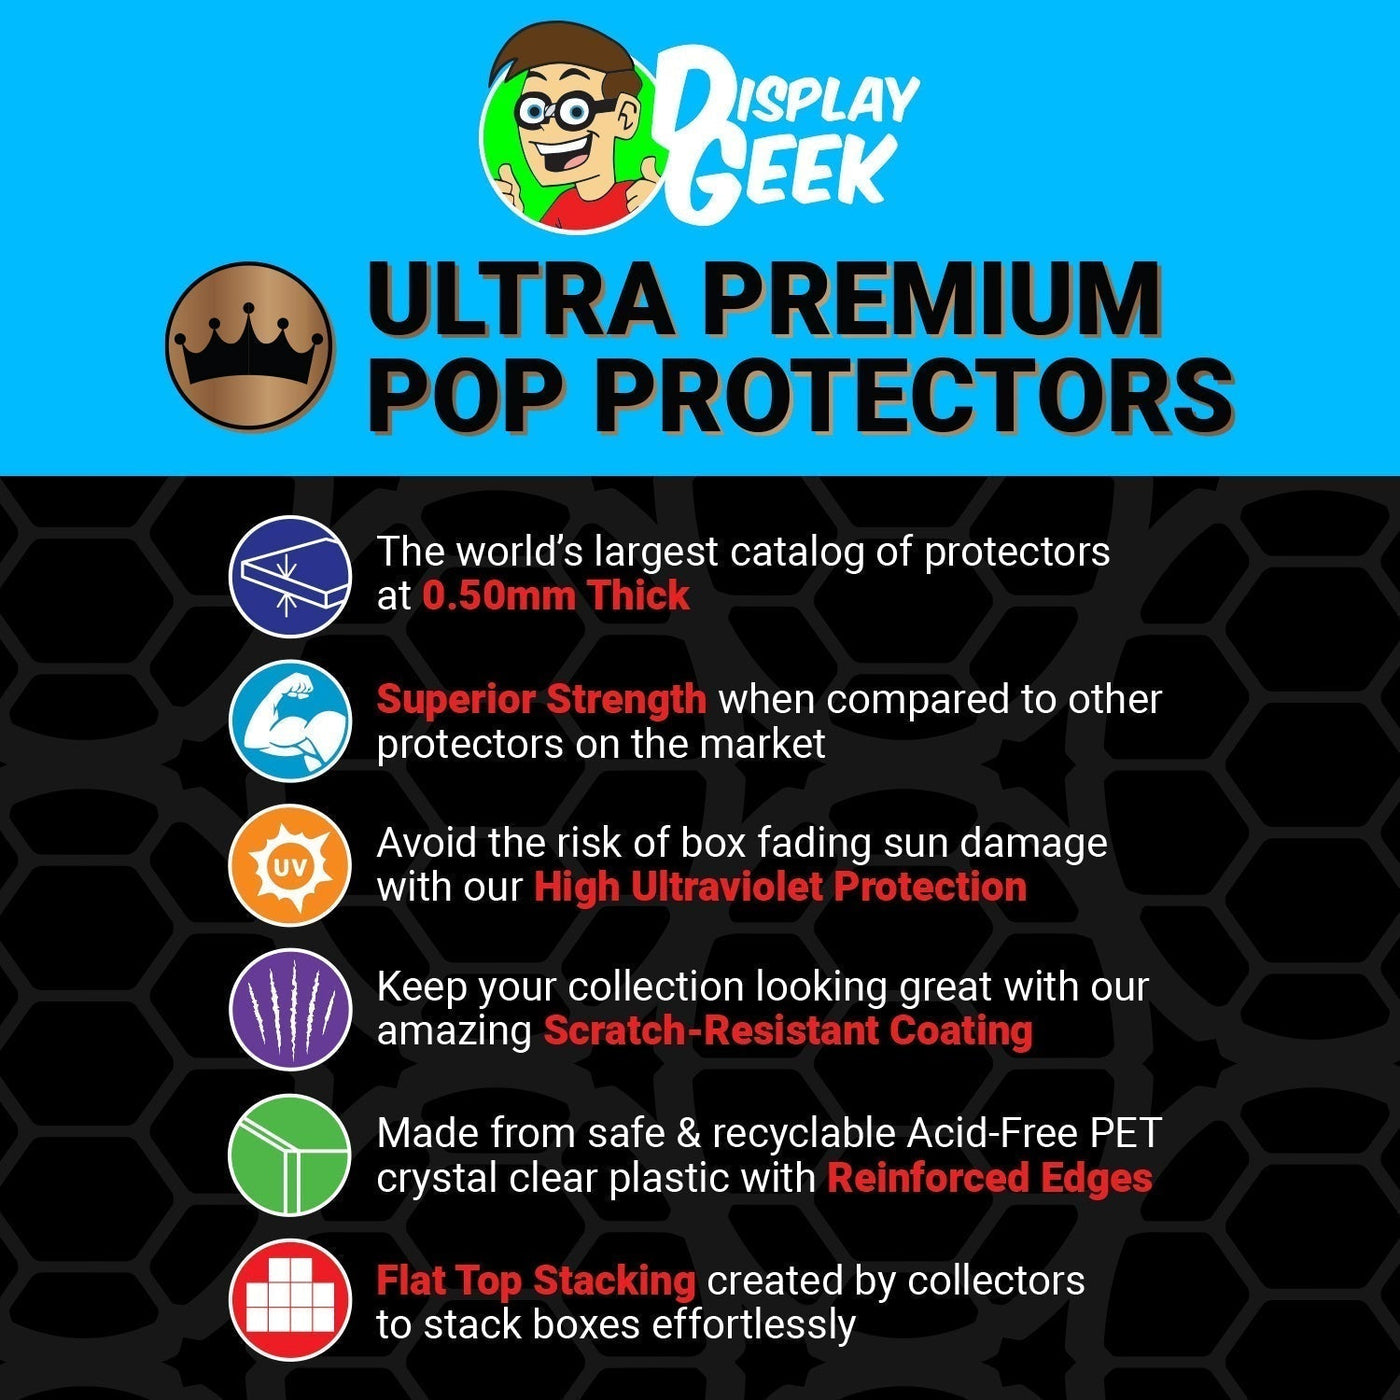 Pop Protector for God Loki #1326 Funko Pop Deluxe on The Protector Guide App by Display Geek